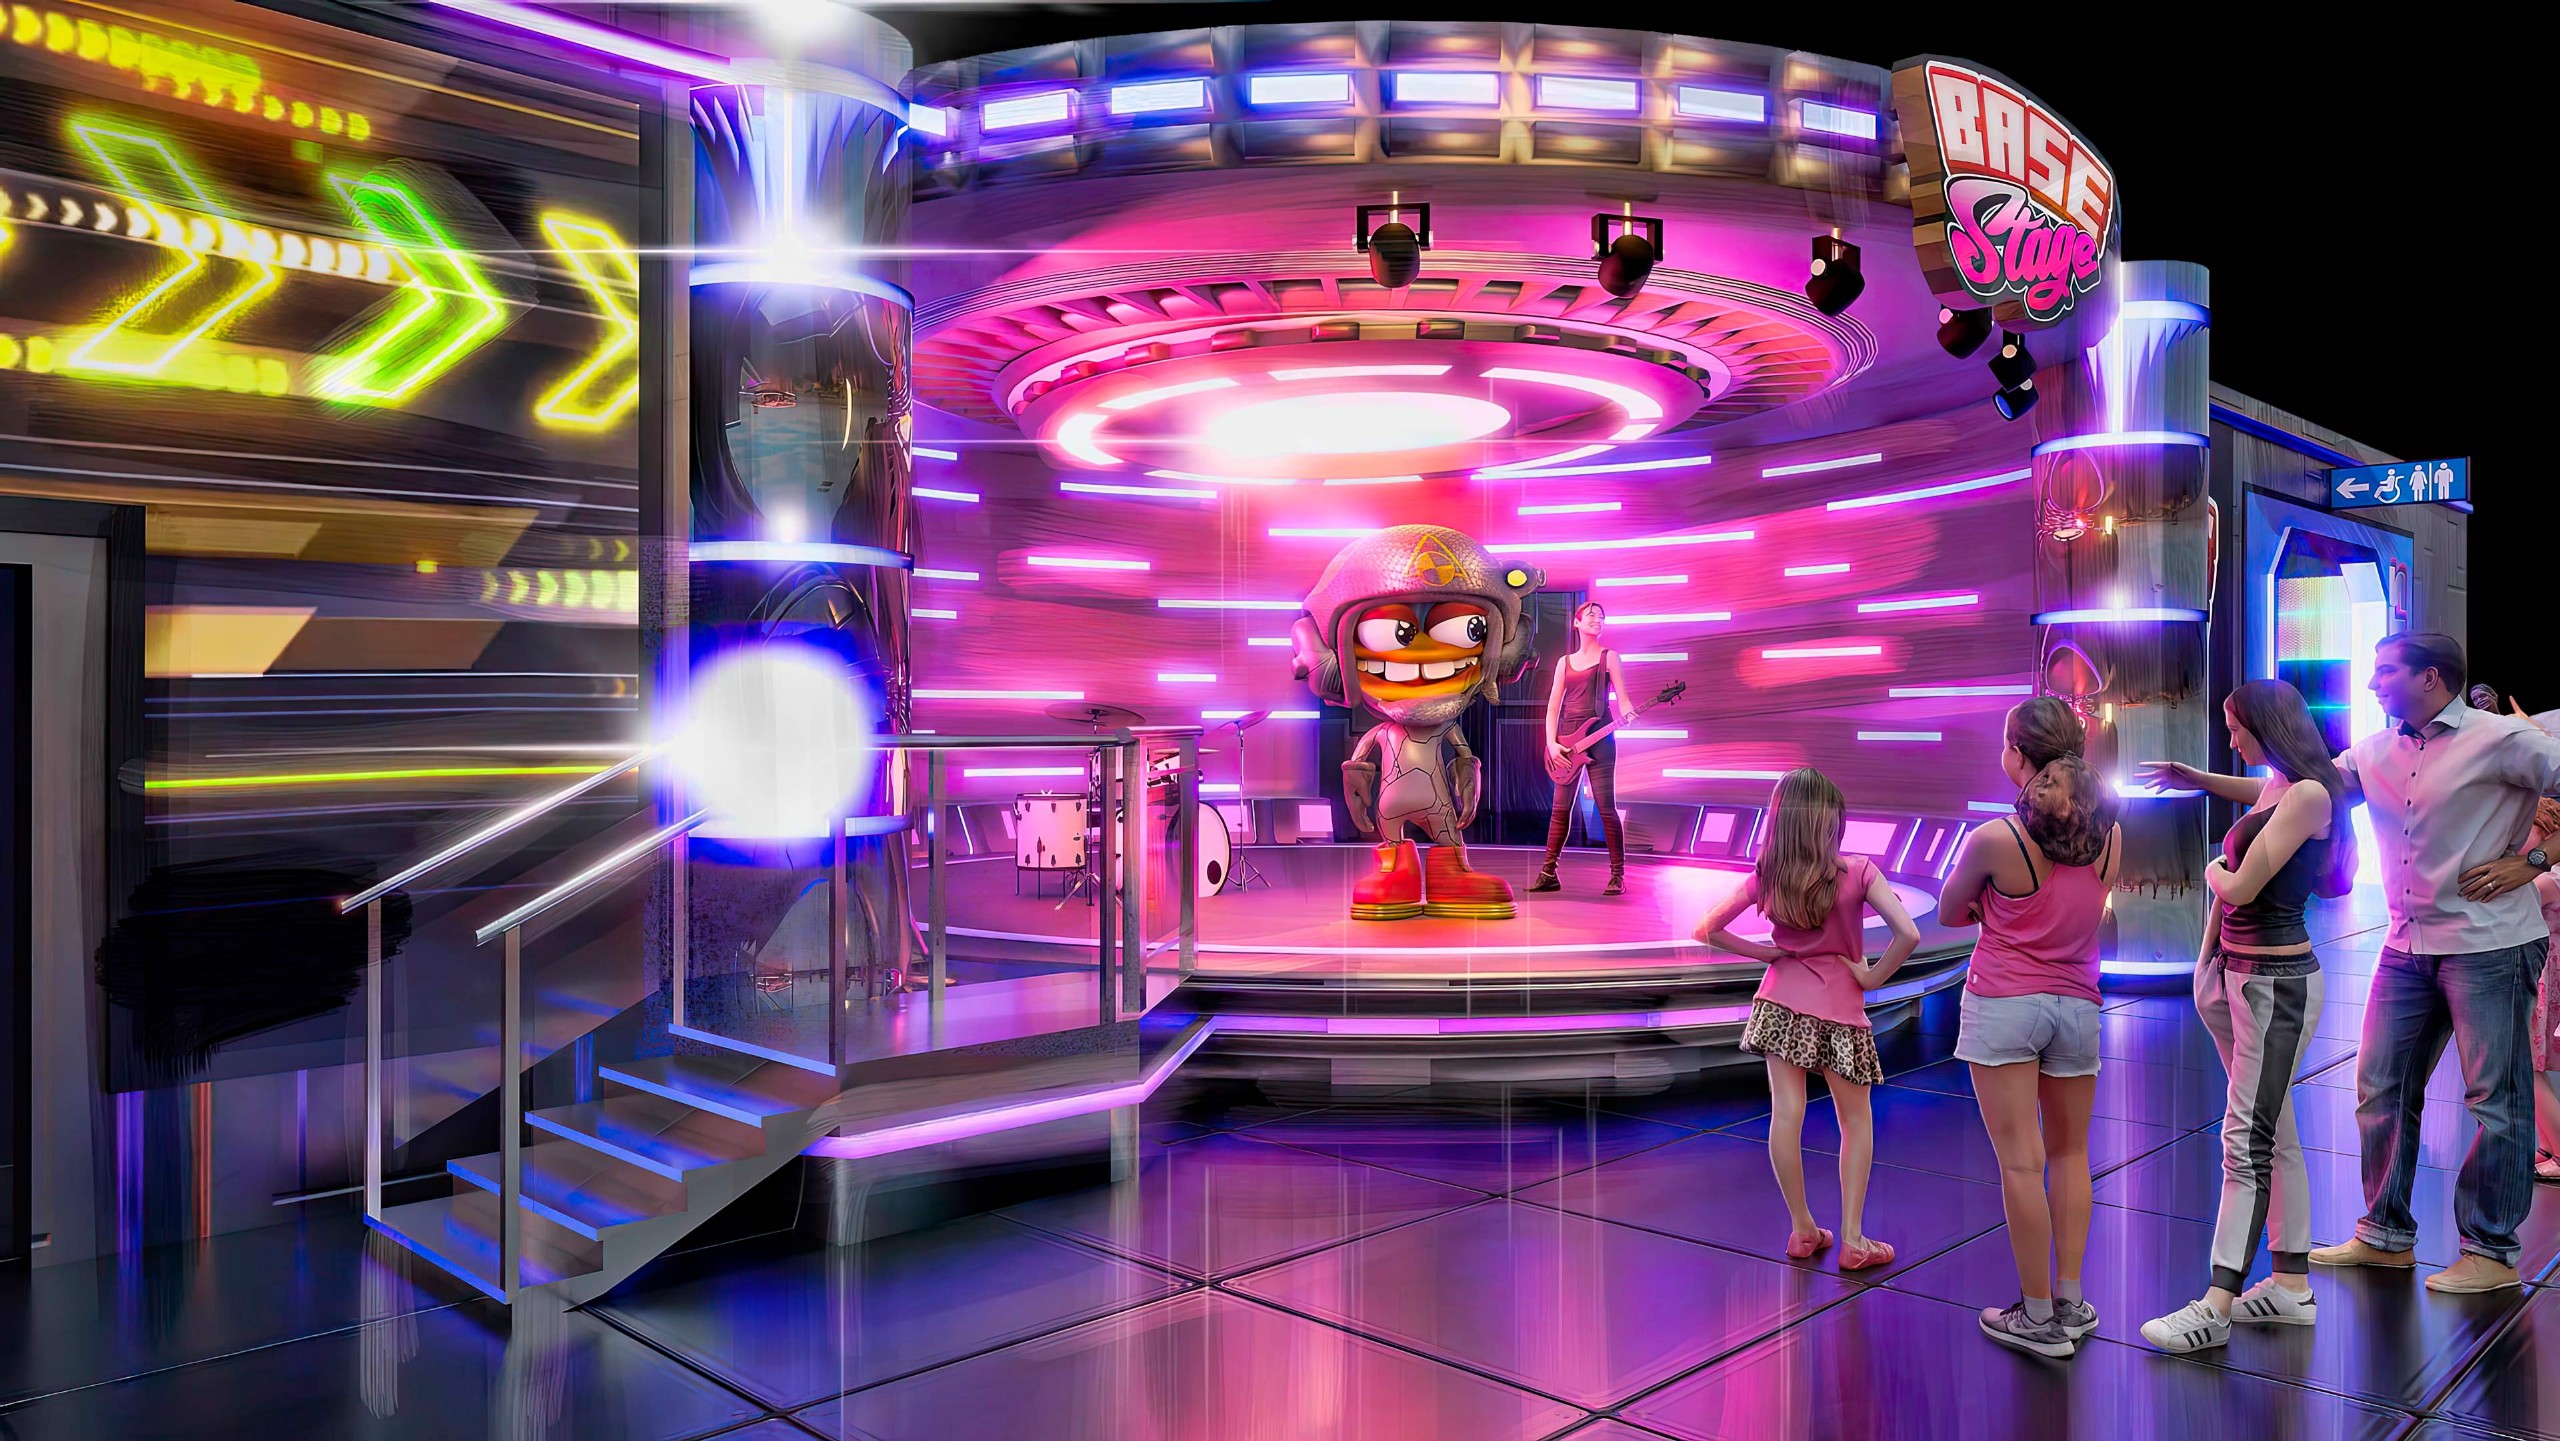 THEMATIC MUSICAL STAGE, INDOOR THEME PARK MUSICAL STAGE